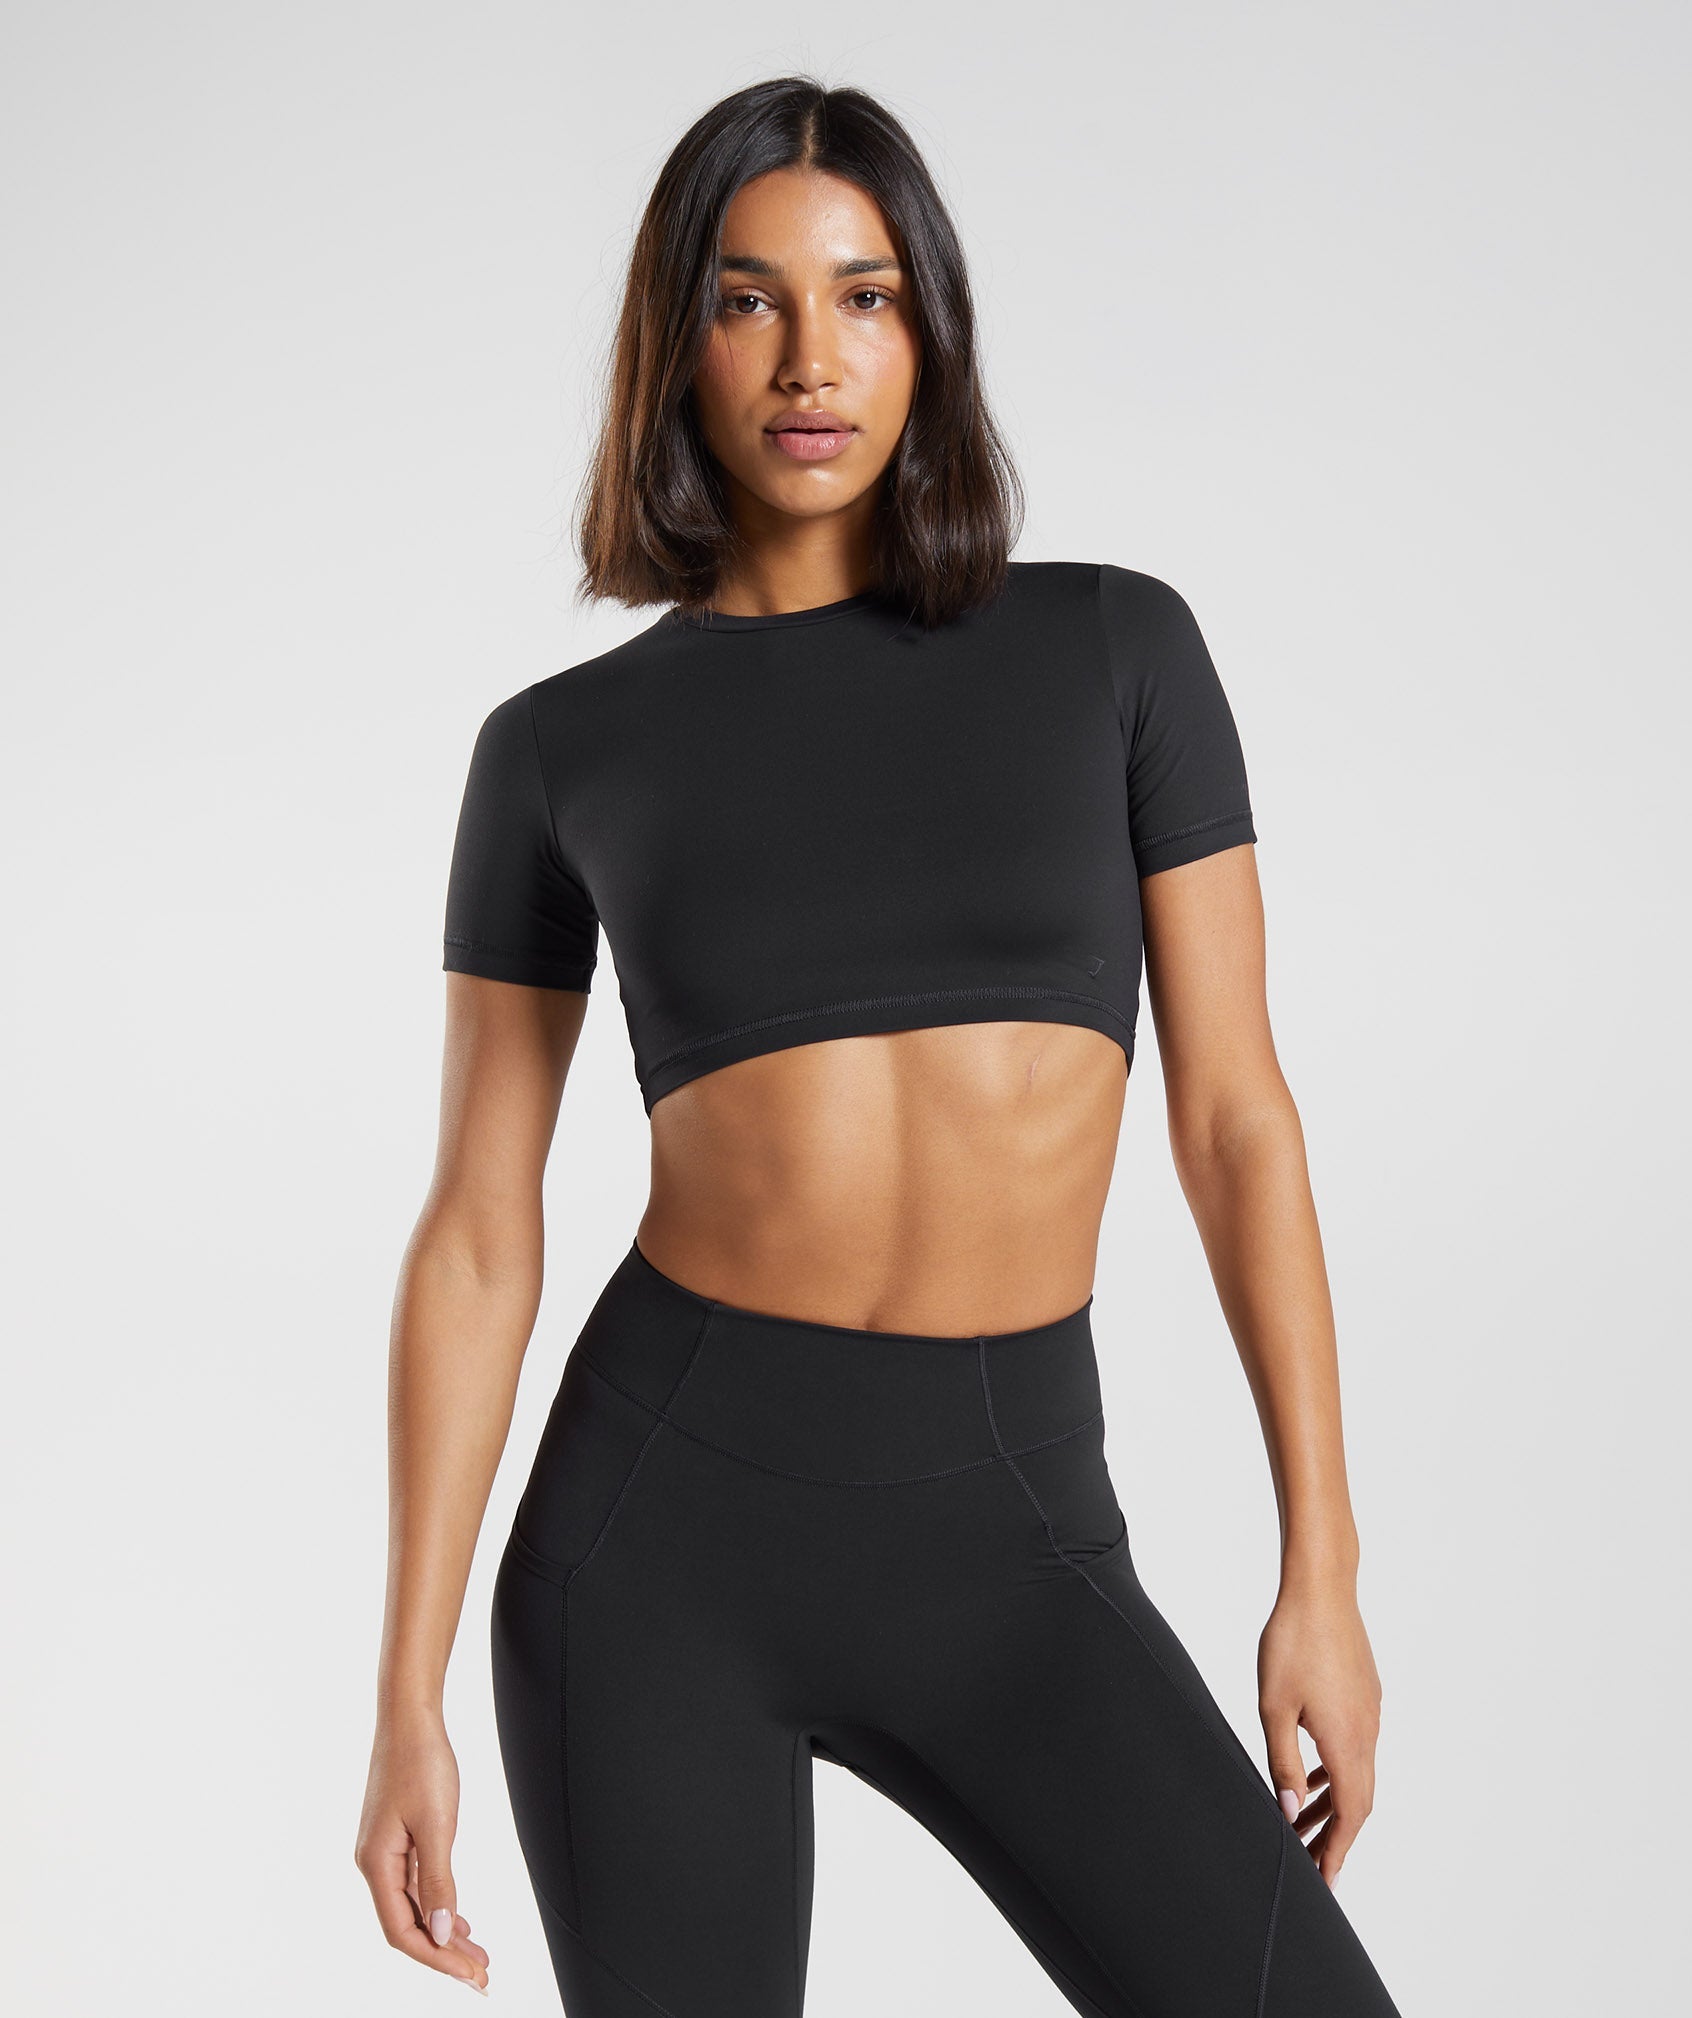 Gymshark Whitney Simmons Stretch Waist Black Womens Fitted Joggers